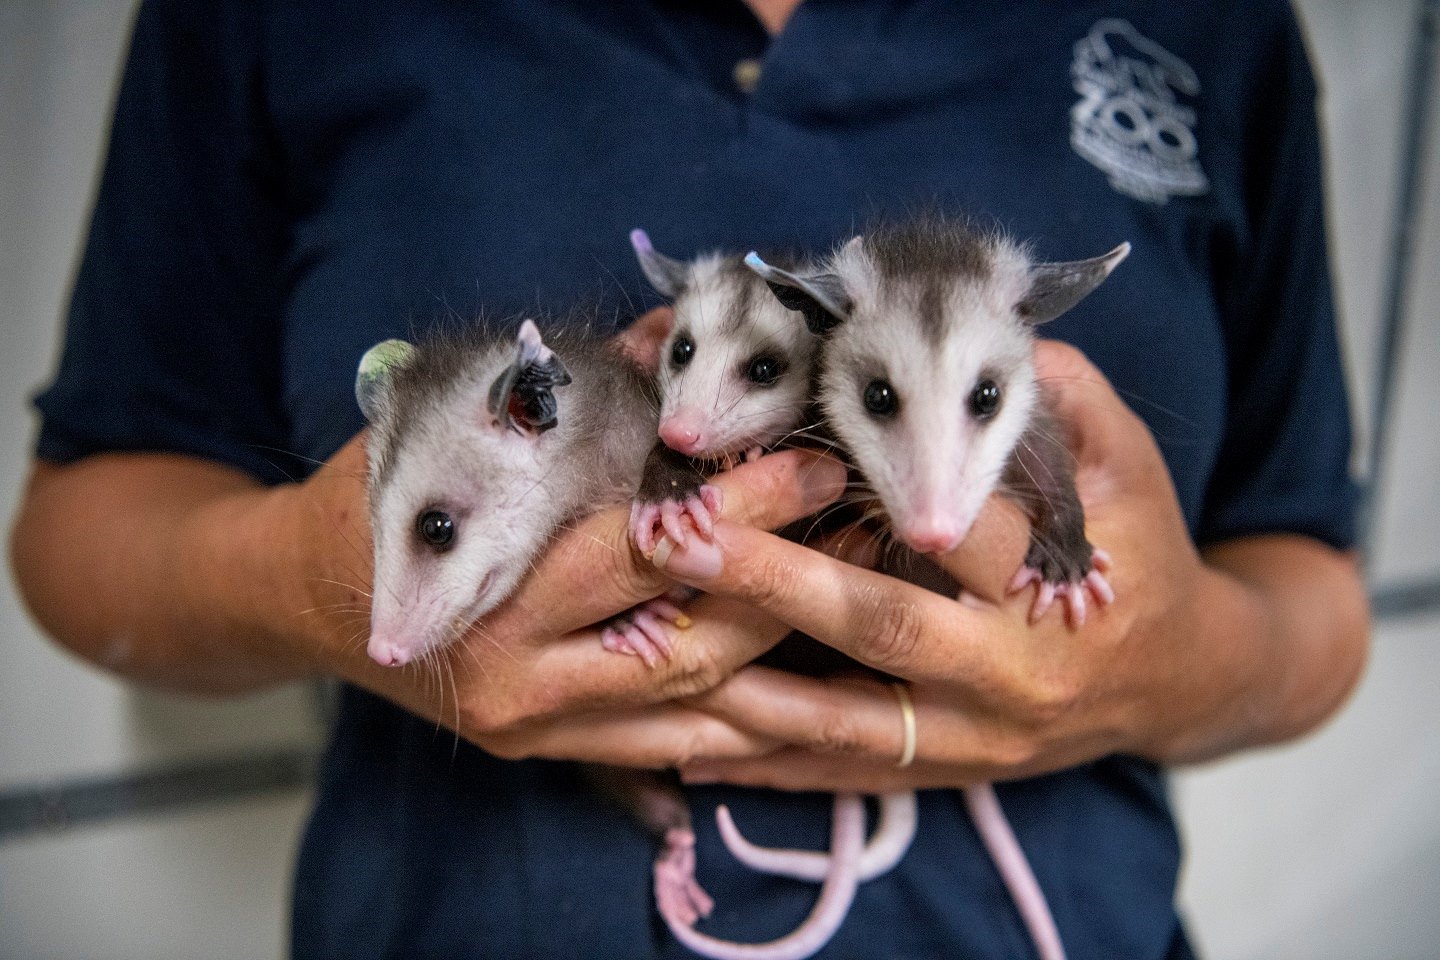 The Ultimate Guide To Raising A Wild Baby Opossum As A Pet